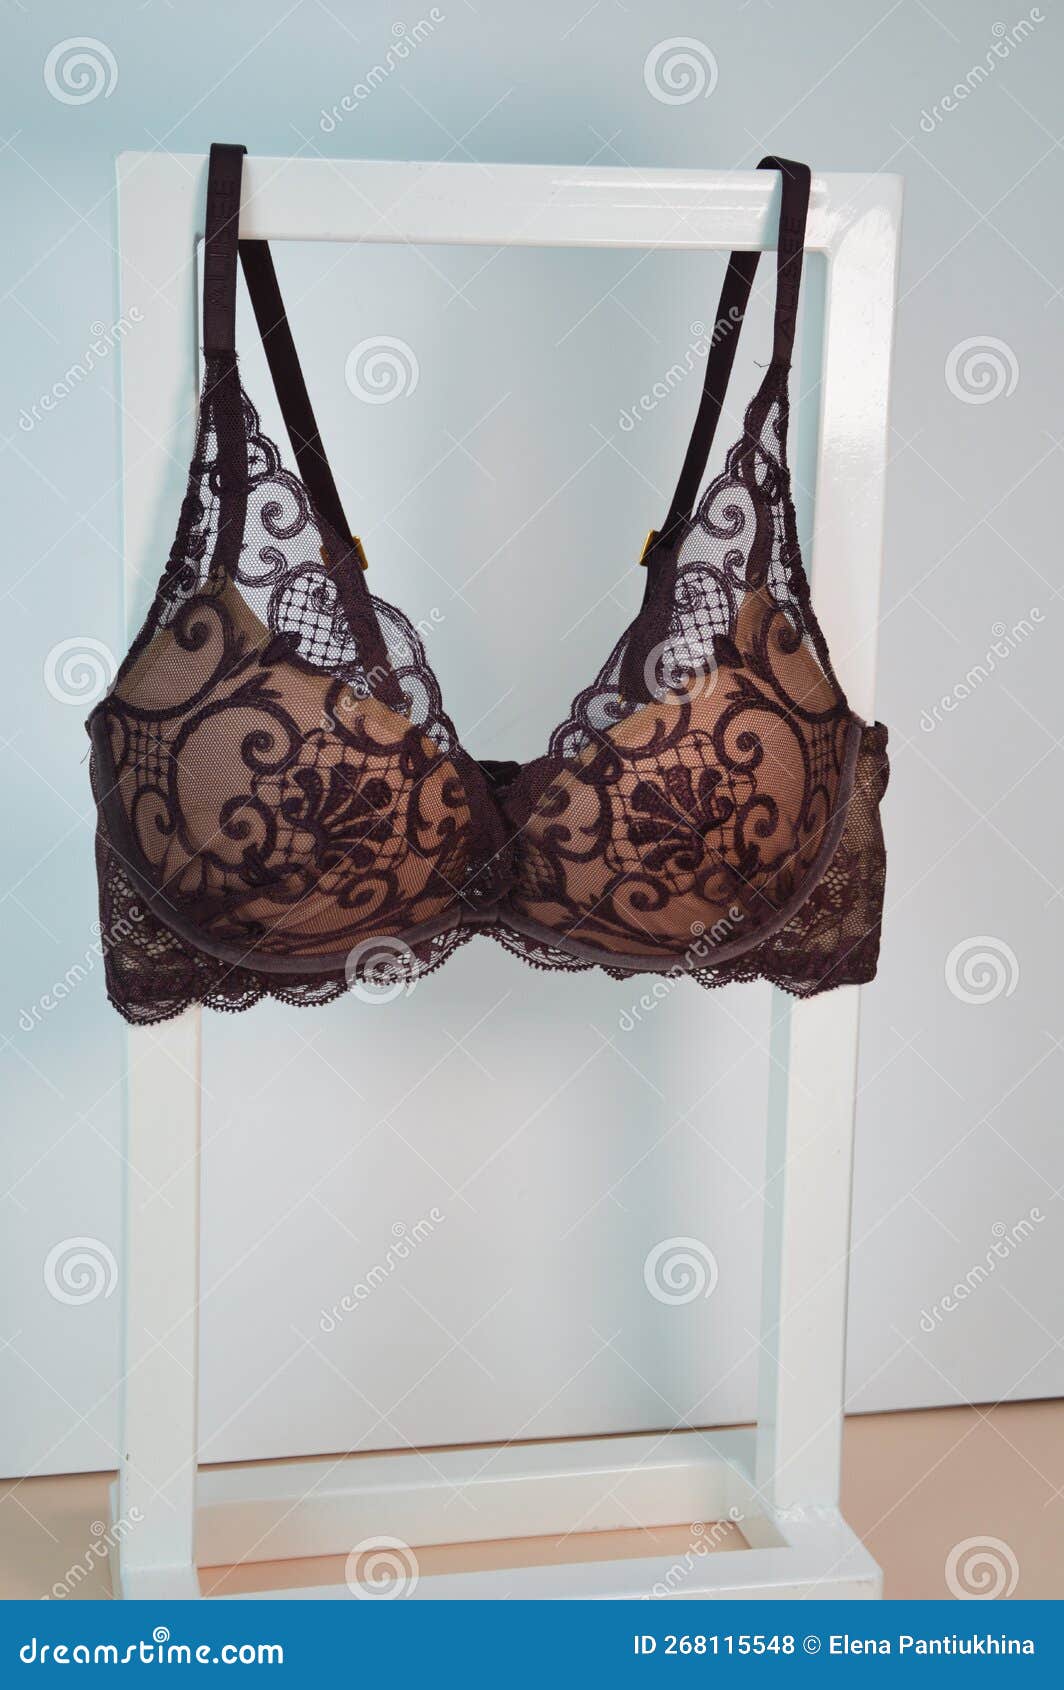 Dark Plum Women S Push-up Bra. One Lace Bra Hangs on a Stand Close-up on a  White Background. Women S Underwear. Stock Photo - Image of beautiful, black:  268115548